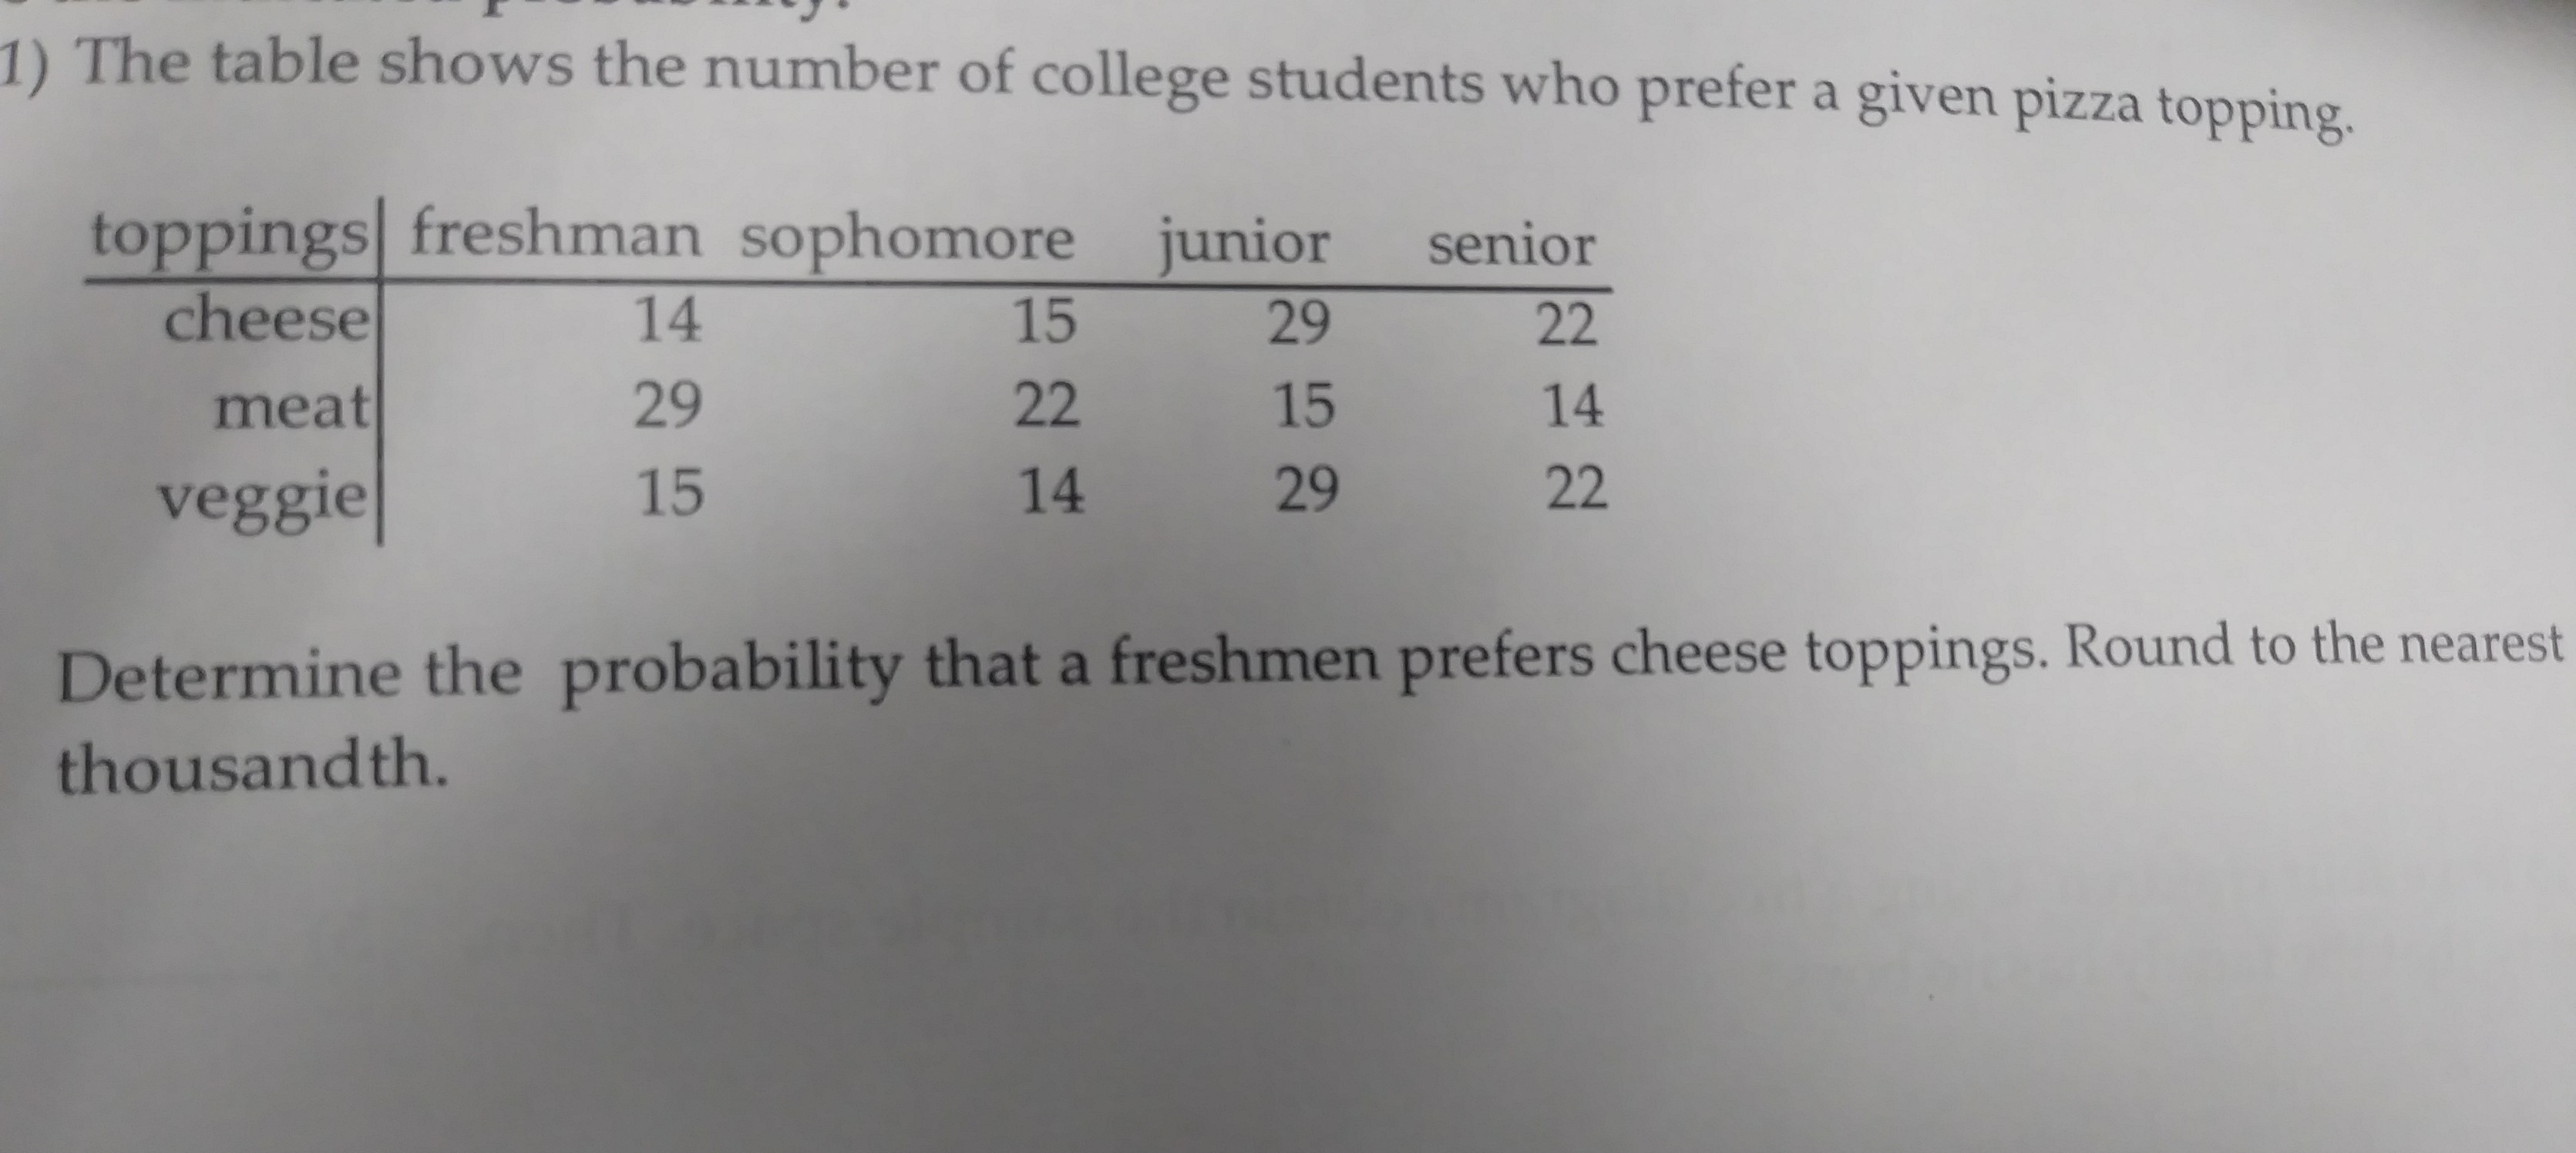 1) The table shows the number of college students who prefer a given pizza topping.
toppings freshman sophomore junior
senior
cheese
14
15
29
22
meat
29
15
14
veggie
22
14
15
Determine the probability that a freshmen prefers cheese toppings. Round to the nearest
thousand th.
222
